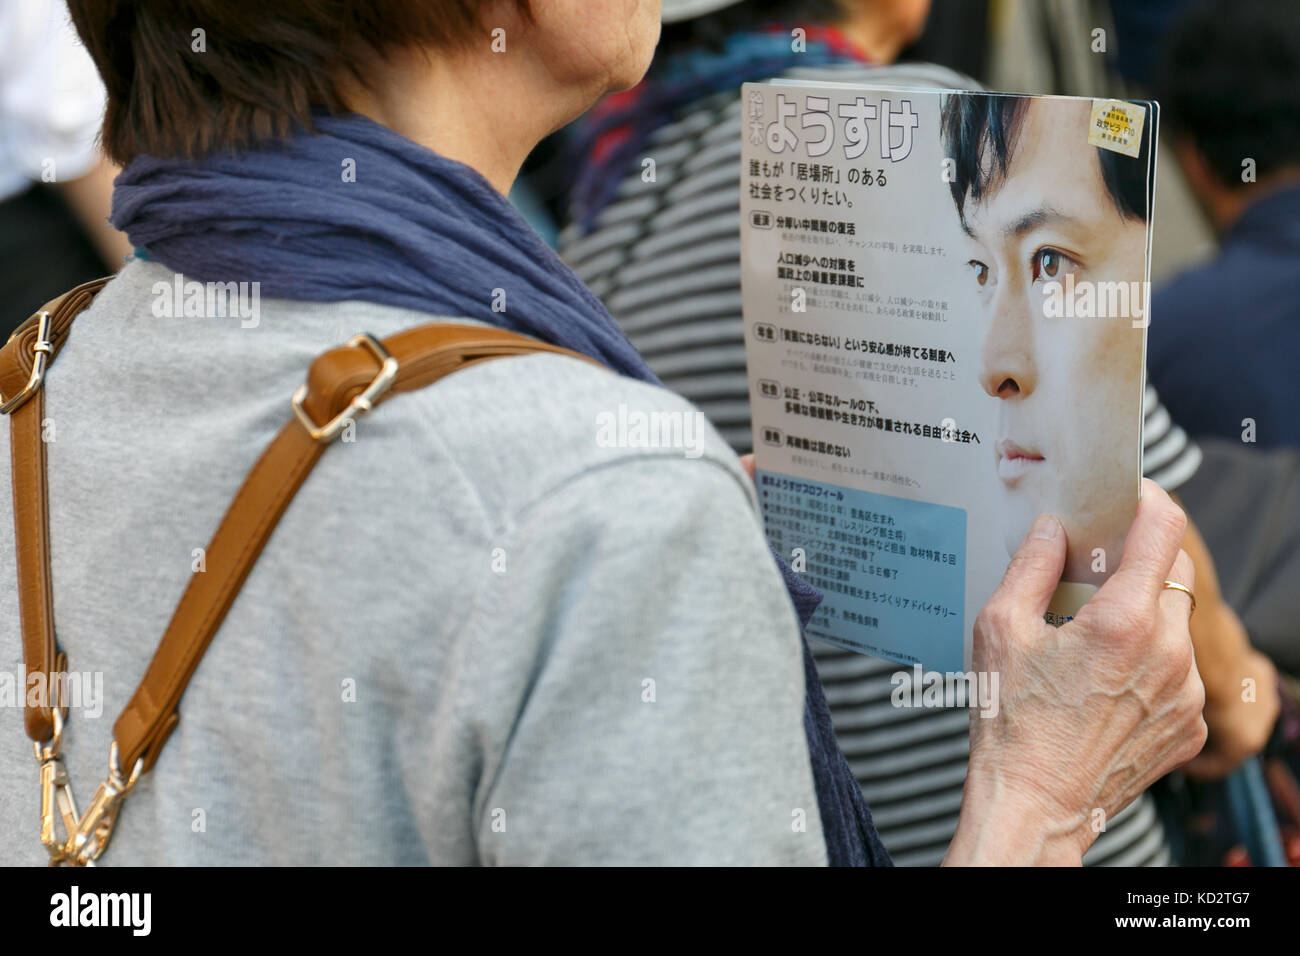 Tokyo, Japan. 10th Oct, 2017. A woman holds propaganda from the Constitutional Democratic Party of Japan outside Ikebukuro Station on October 10, 2017, Tokyo, Japan. Yukio Edano, head of the newly created Constitutional Democratic Party (CDP) attended a campaign event to support his party's candidate Yosuke Suzuki. Campaigning officially started on October 10 for the October 22 election. Credit: Rodrigo Reyes Marin/AFLO/Alamy Live News Stock Photo